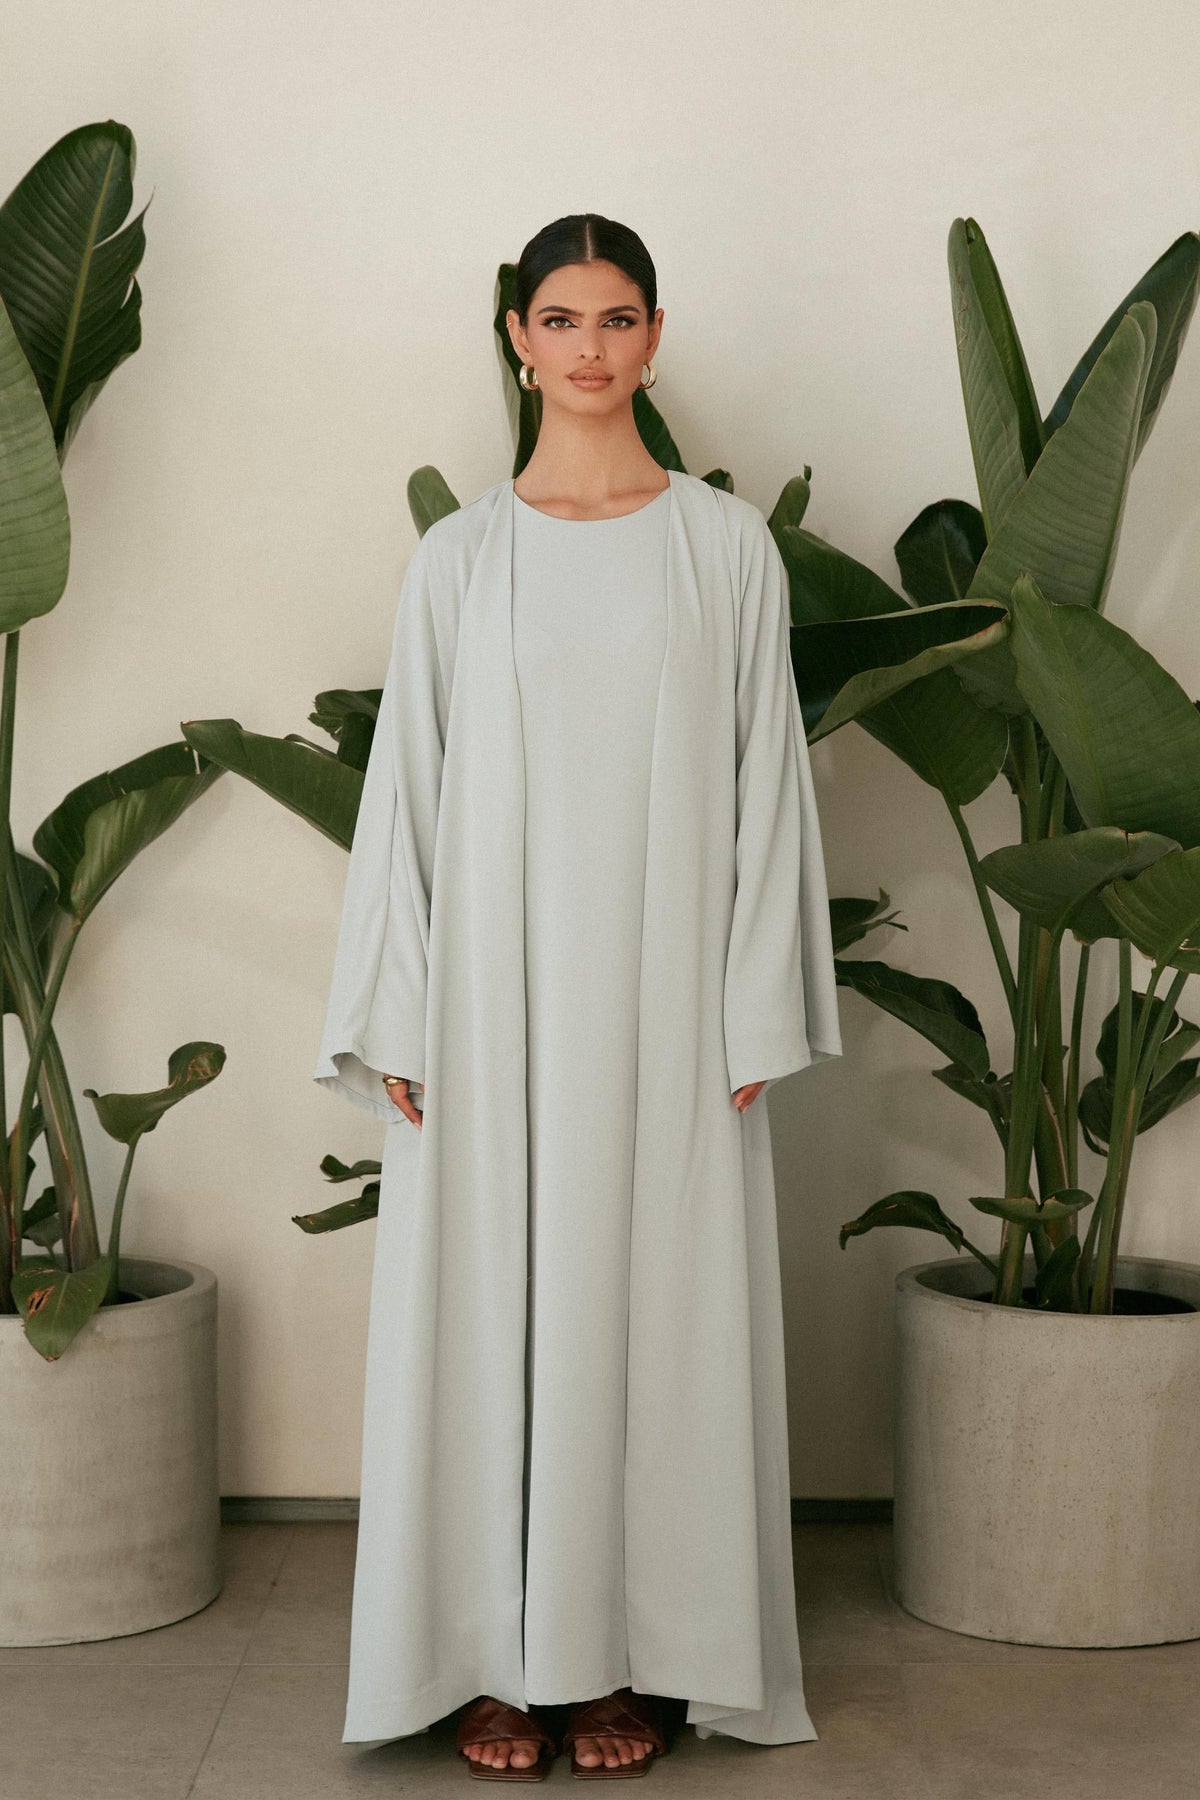 Isabella Open Abaya - Cucumber Veiled Collection 